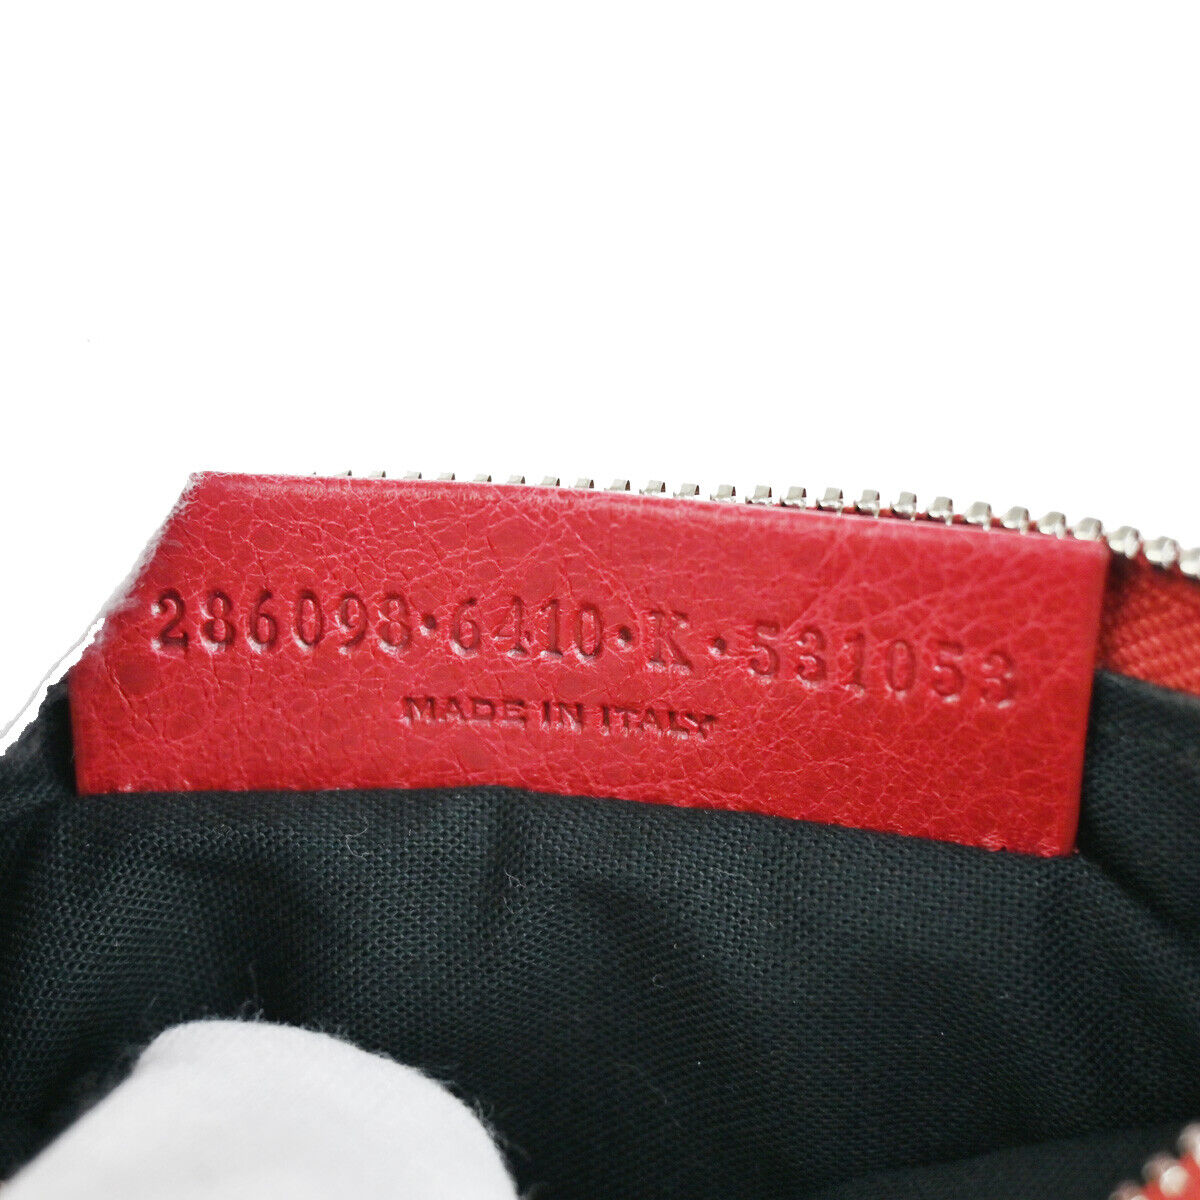 Balenciaga Women's Red Leather Bifold Wallet in Red